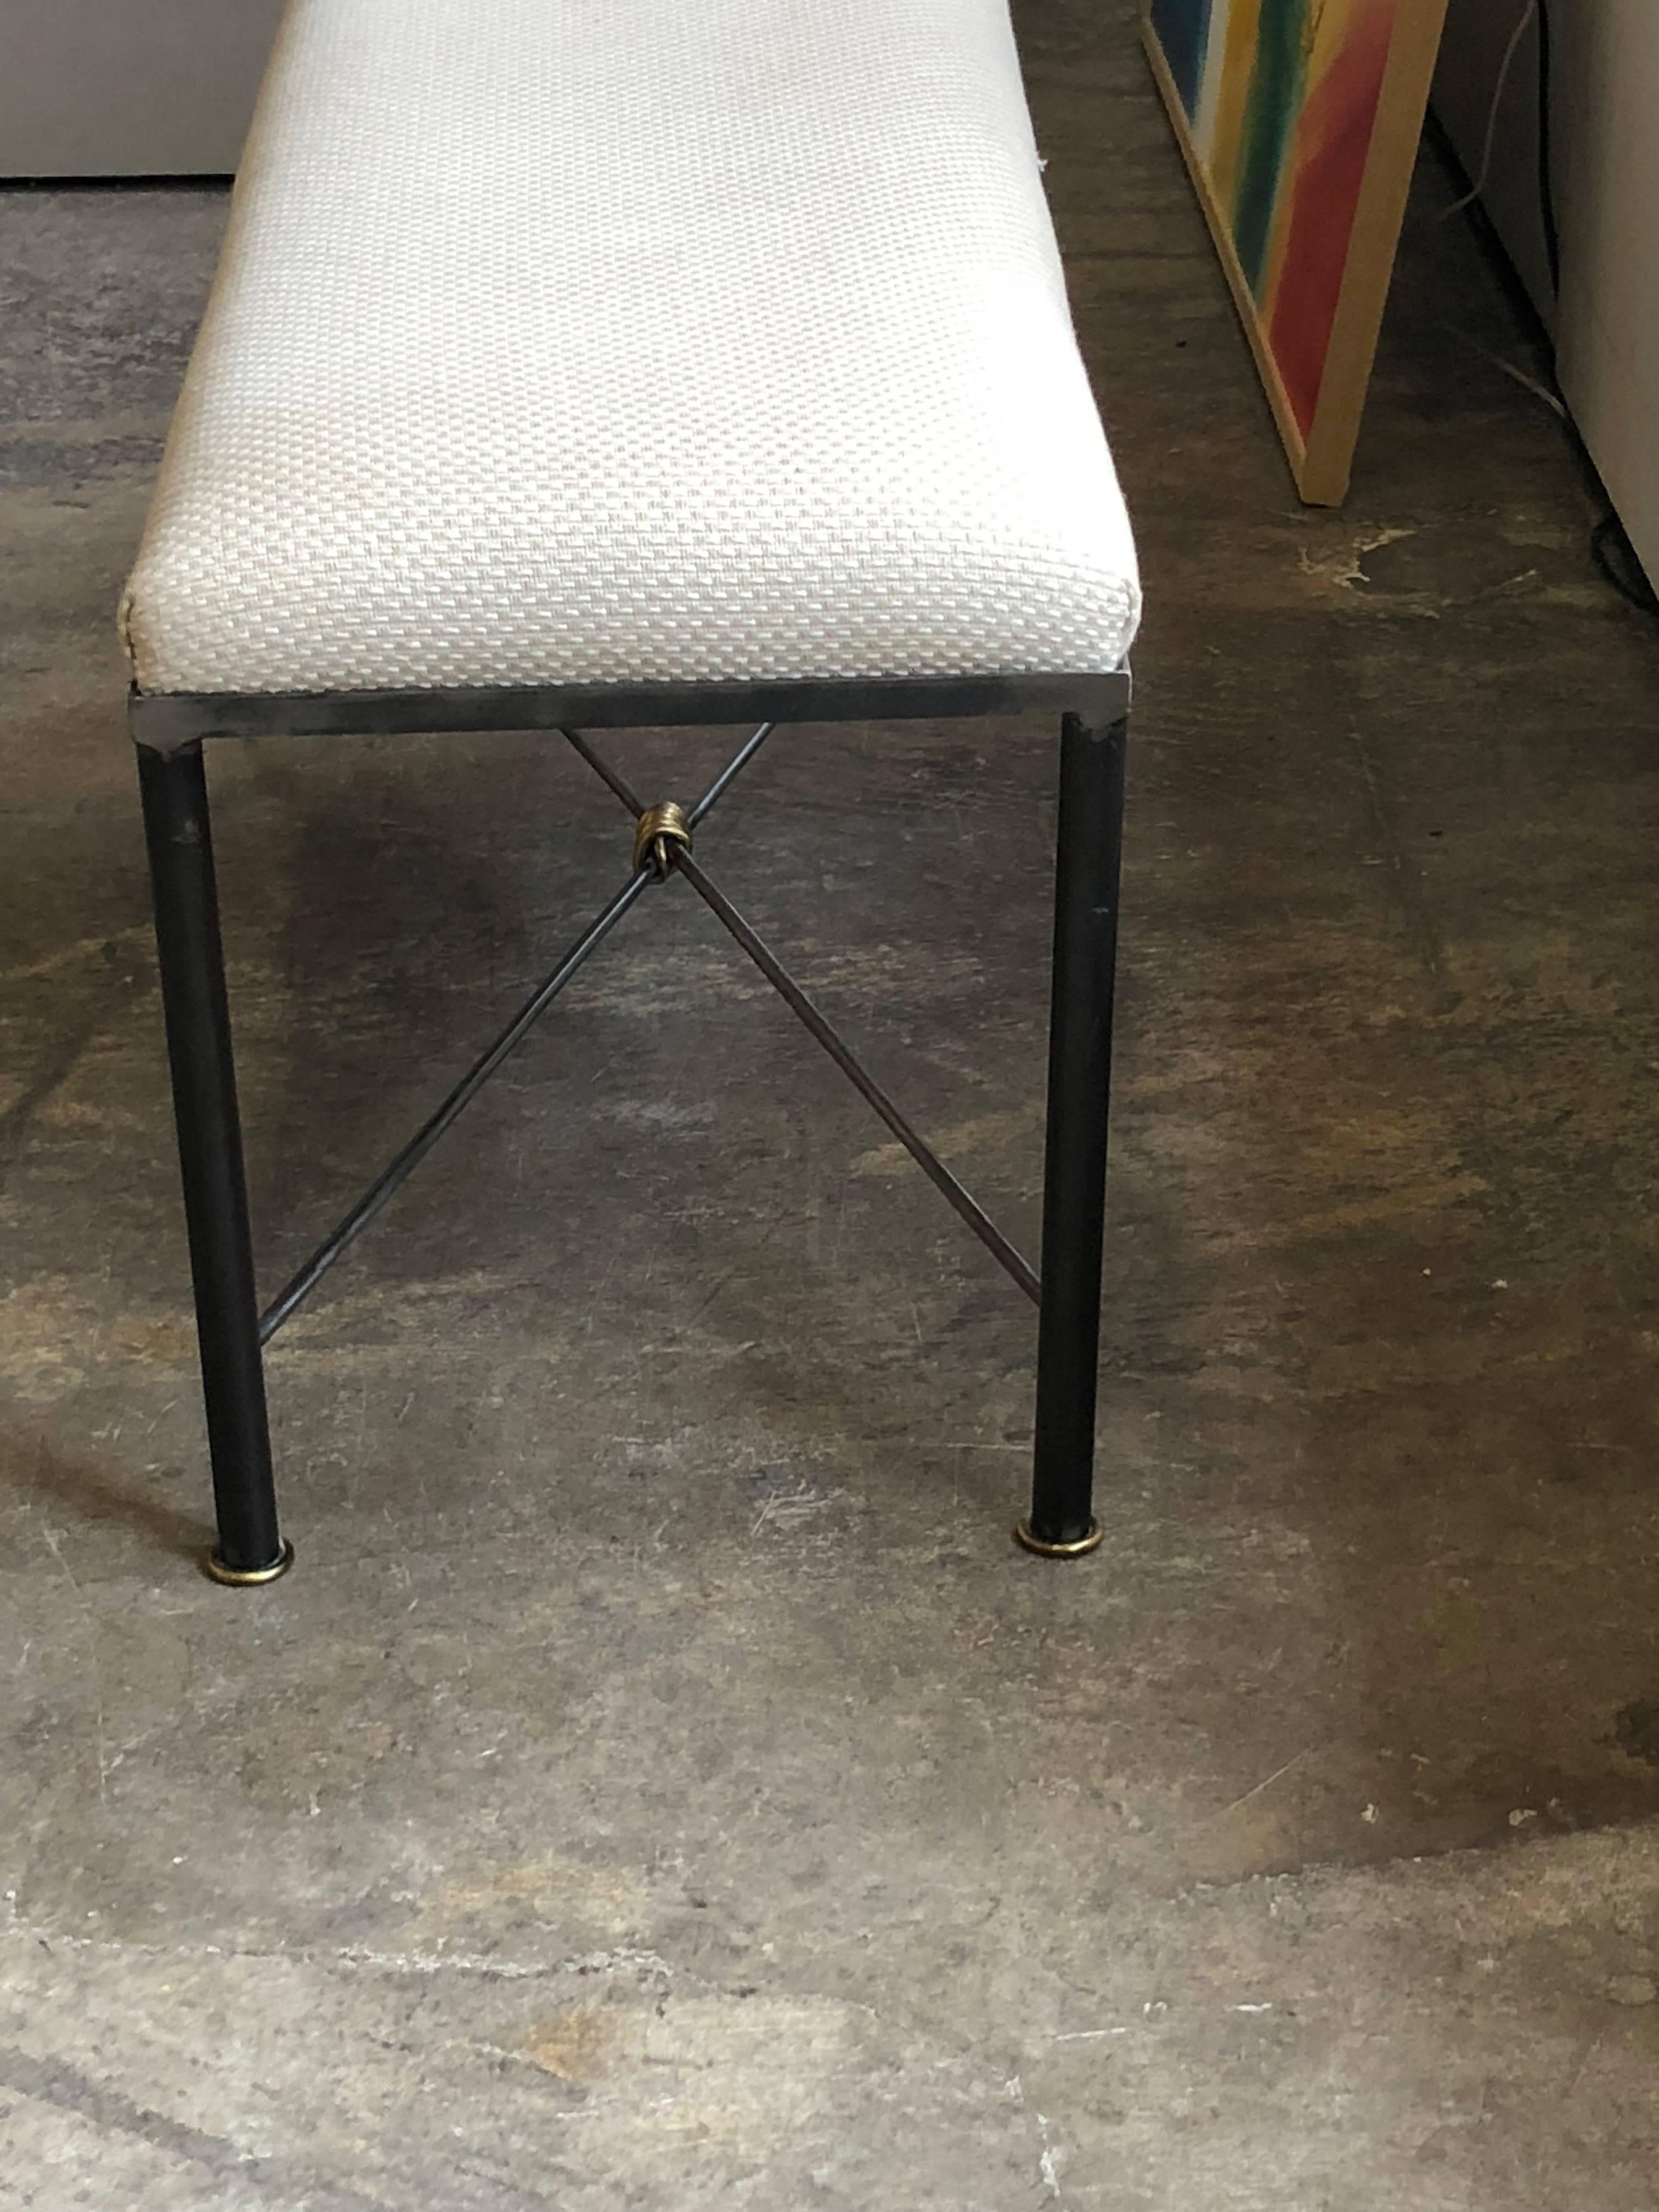 A late 20th century iron, brass and upholstered bench created by Mario Villa having a neutral cream cotton/wool upholstered seat connecting to legs that have a cross stretcher banded by Mr. Villa's distinctive twisted brass technique element; all